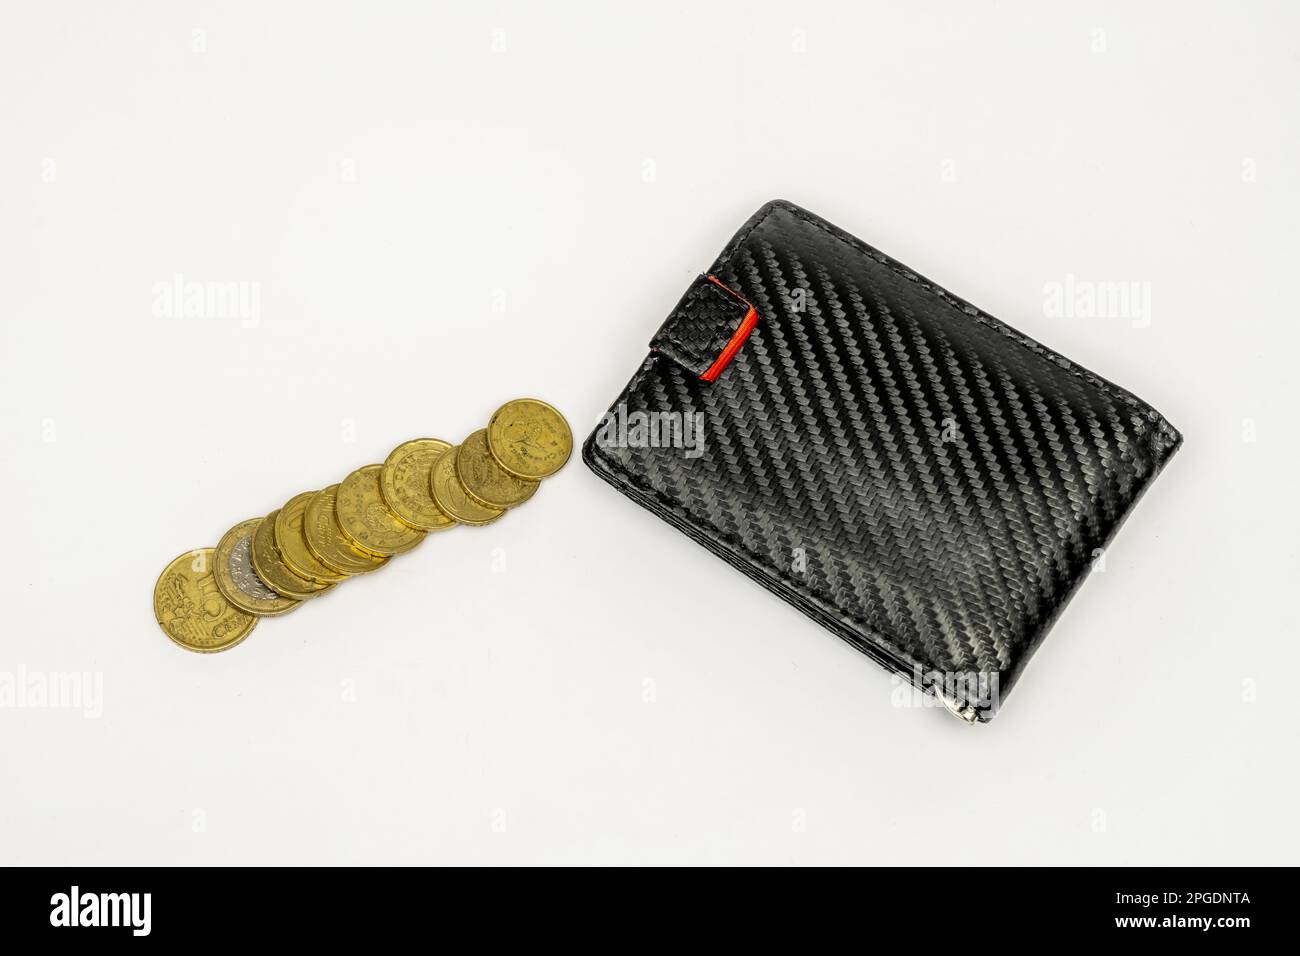 Carbon fiber men's wallet and a few coins commonly used in Europe Stock Photo